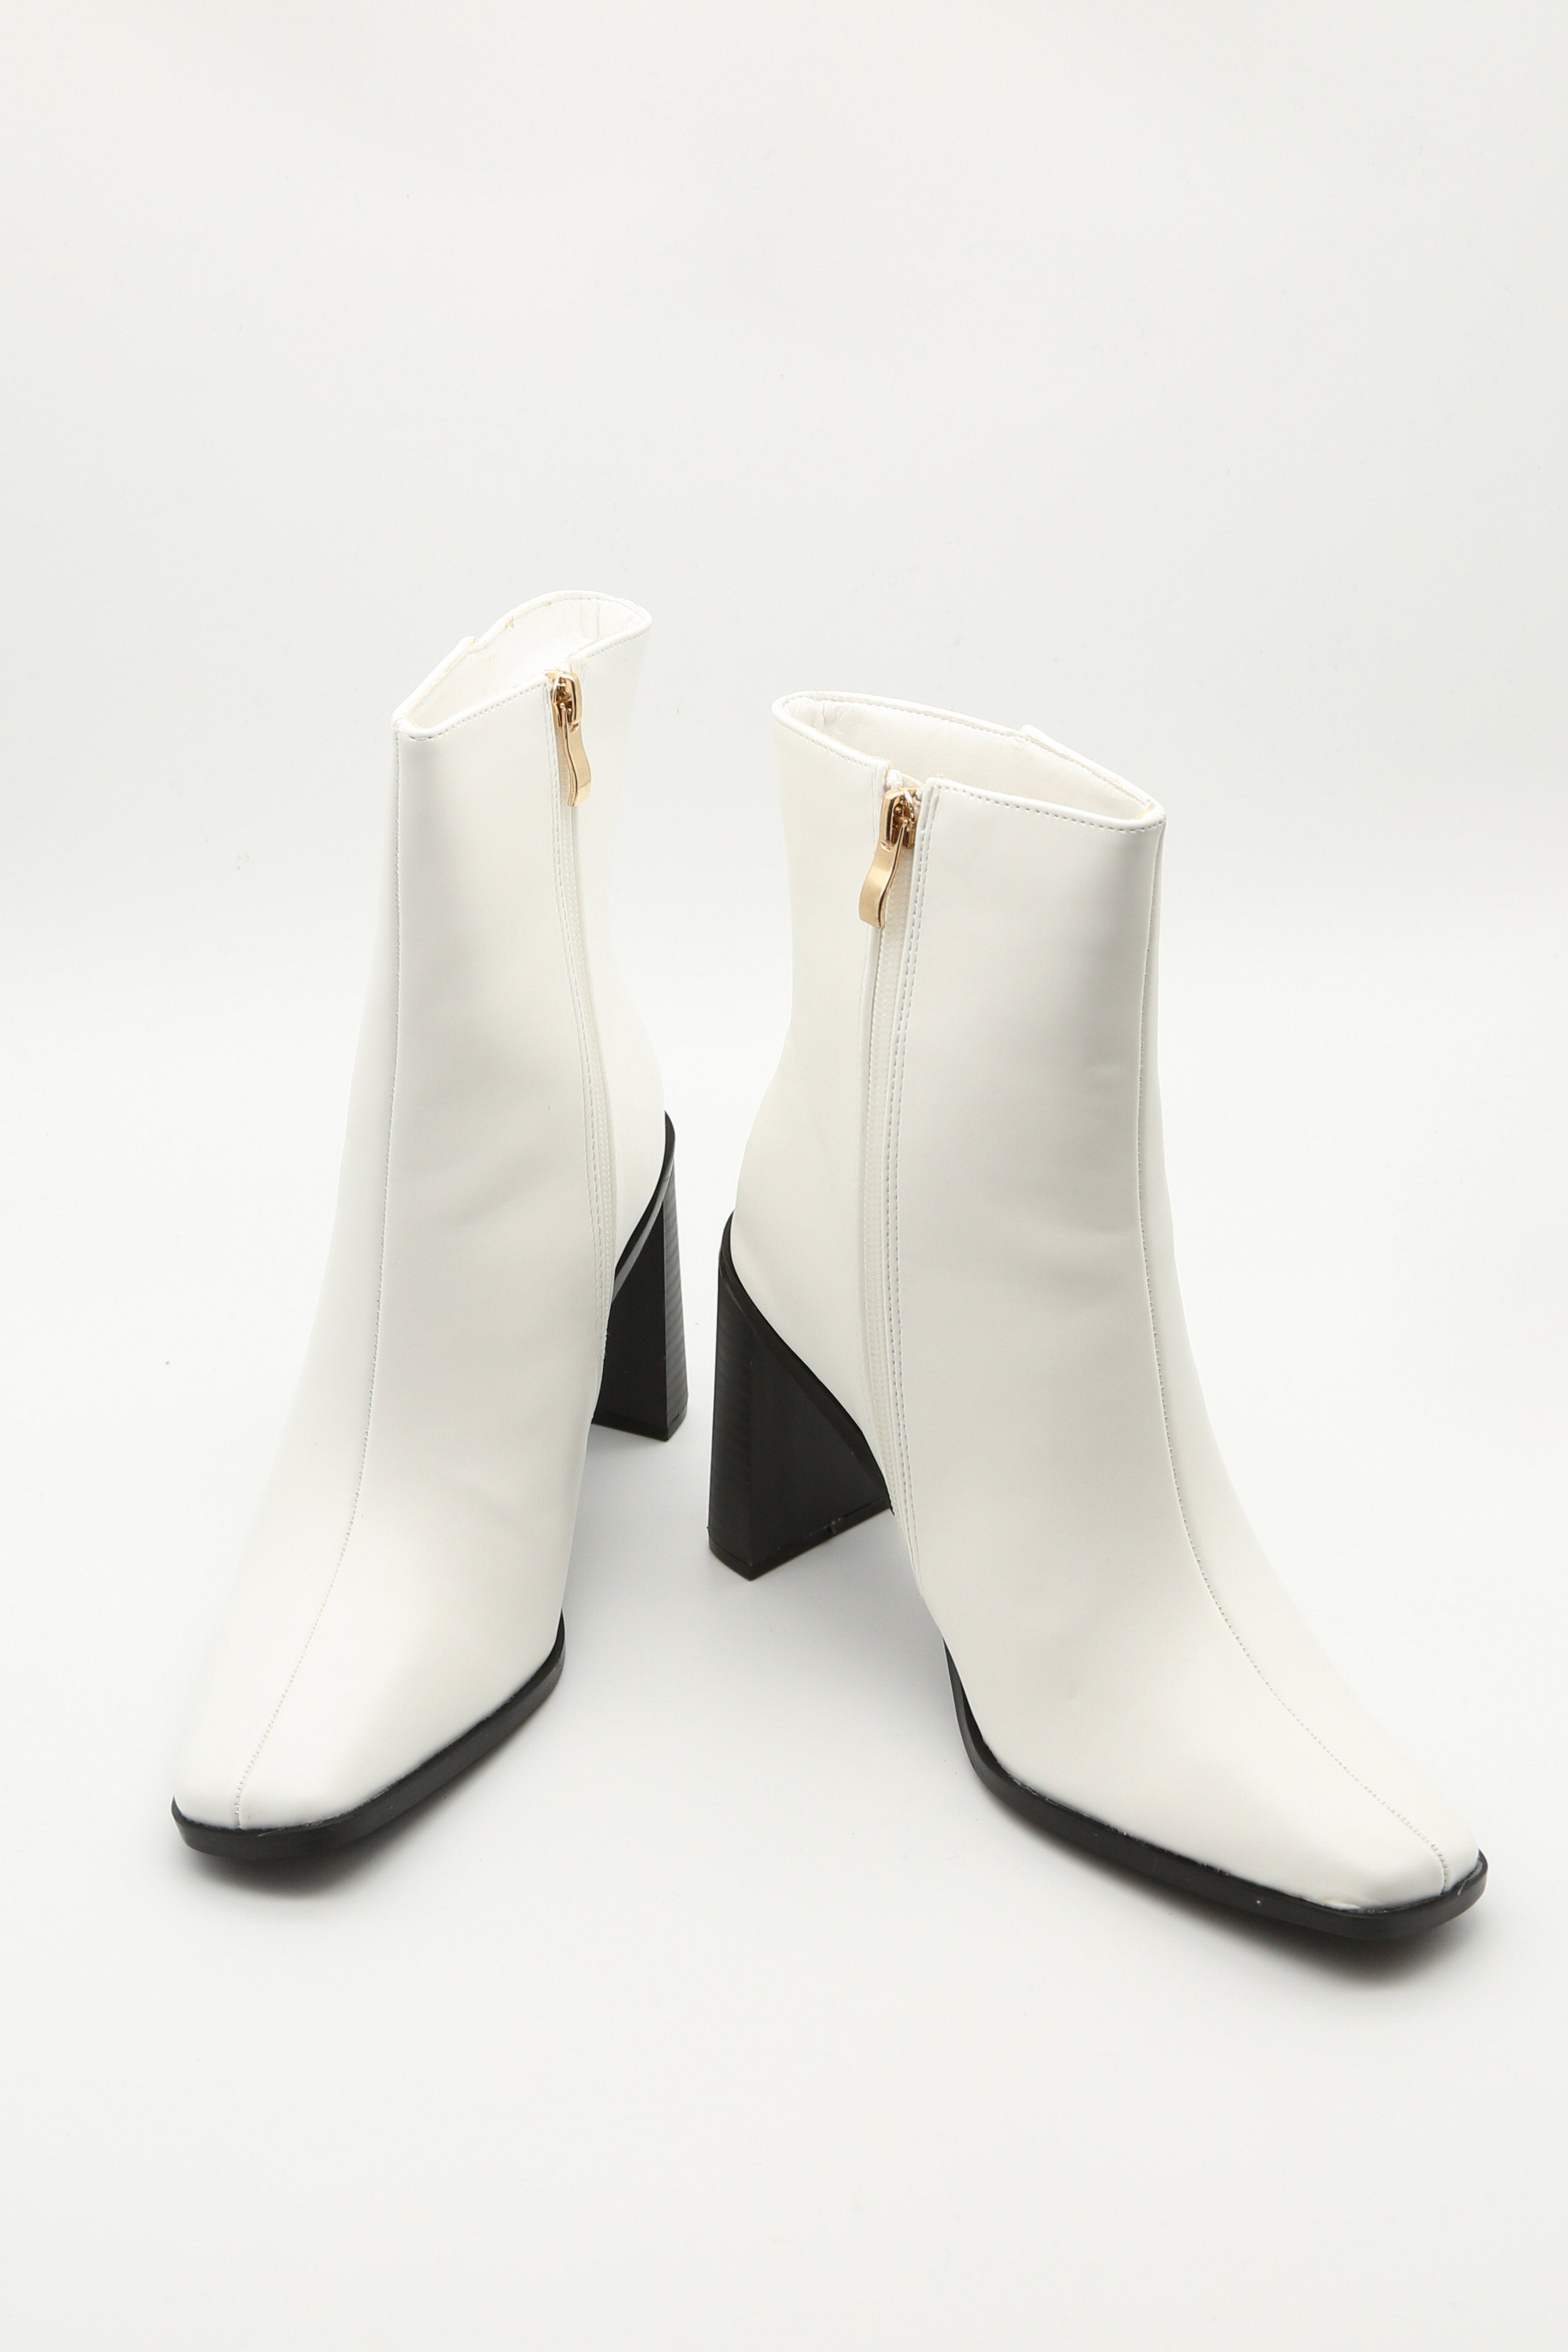 Give It A Whirl Boot | Seychelles Footwear